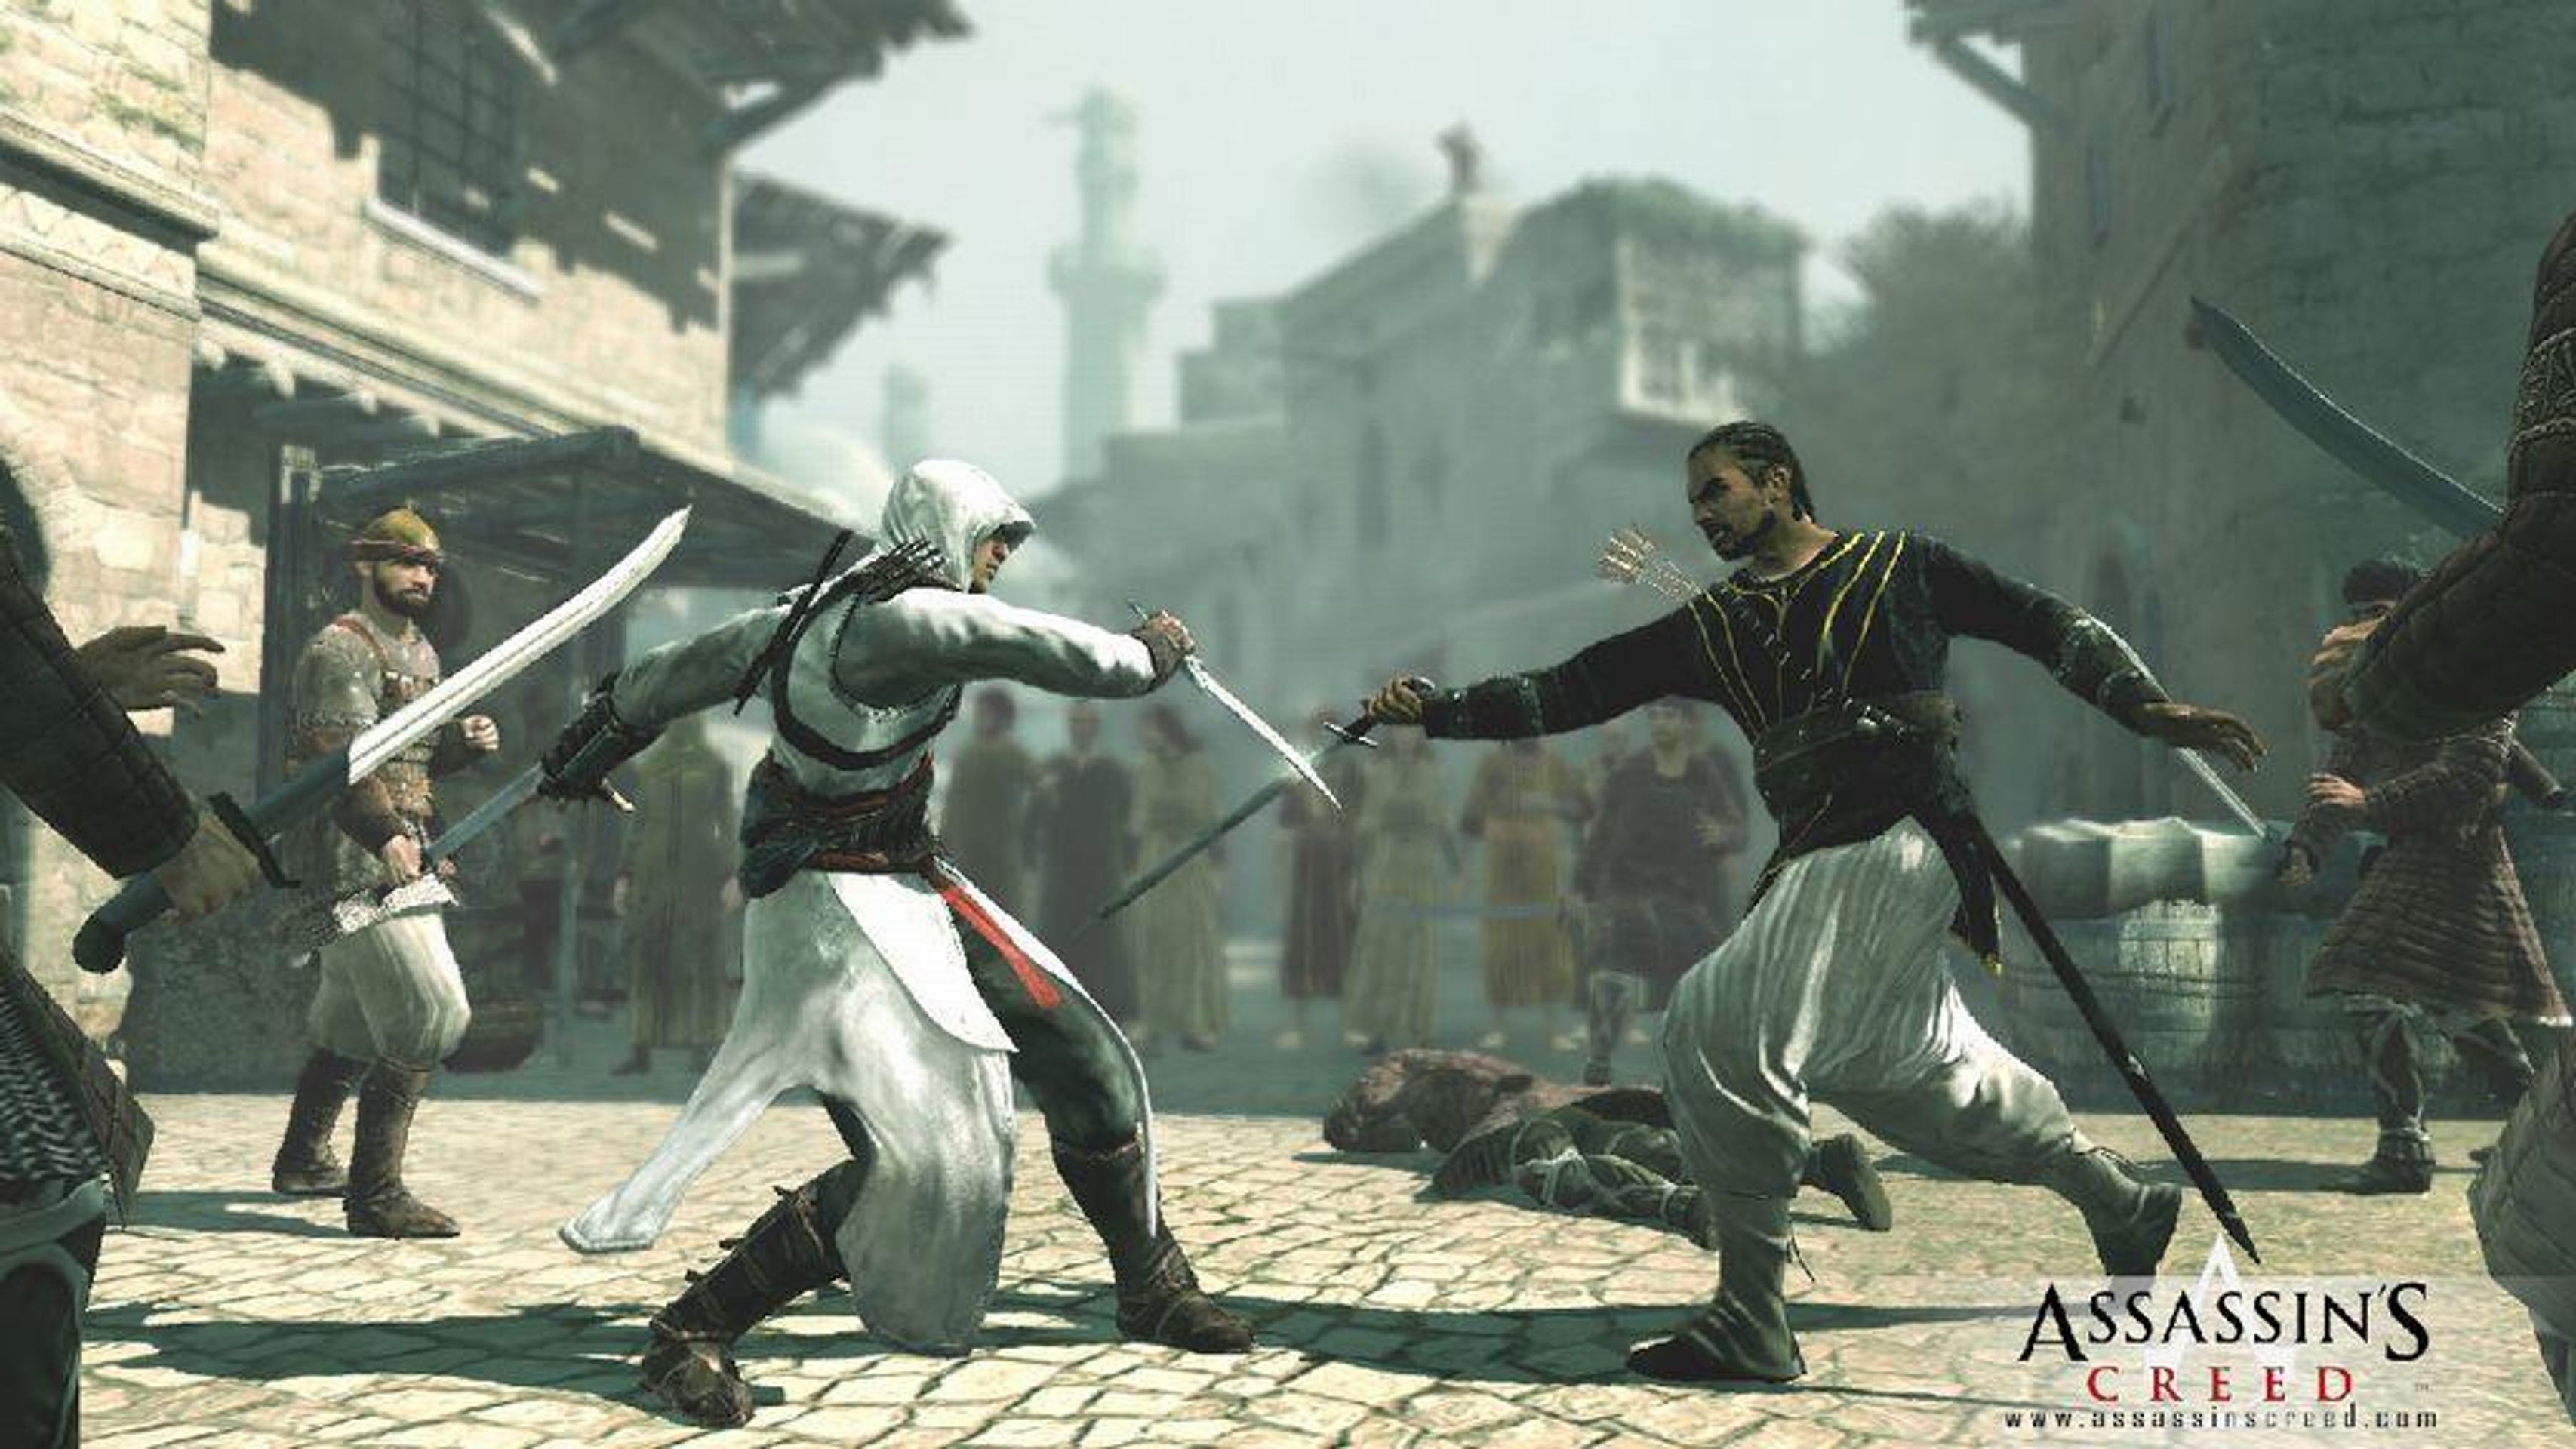 Assassin's Creed - Assassin's Creed galerie (4/5)